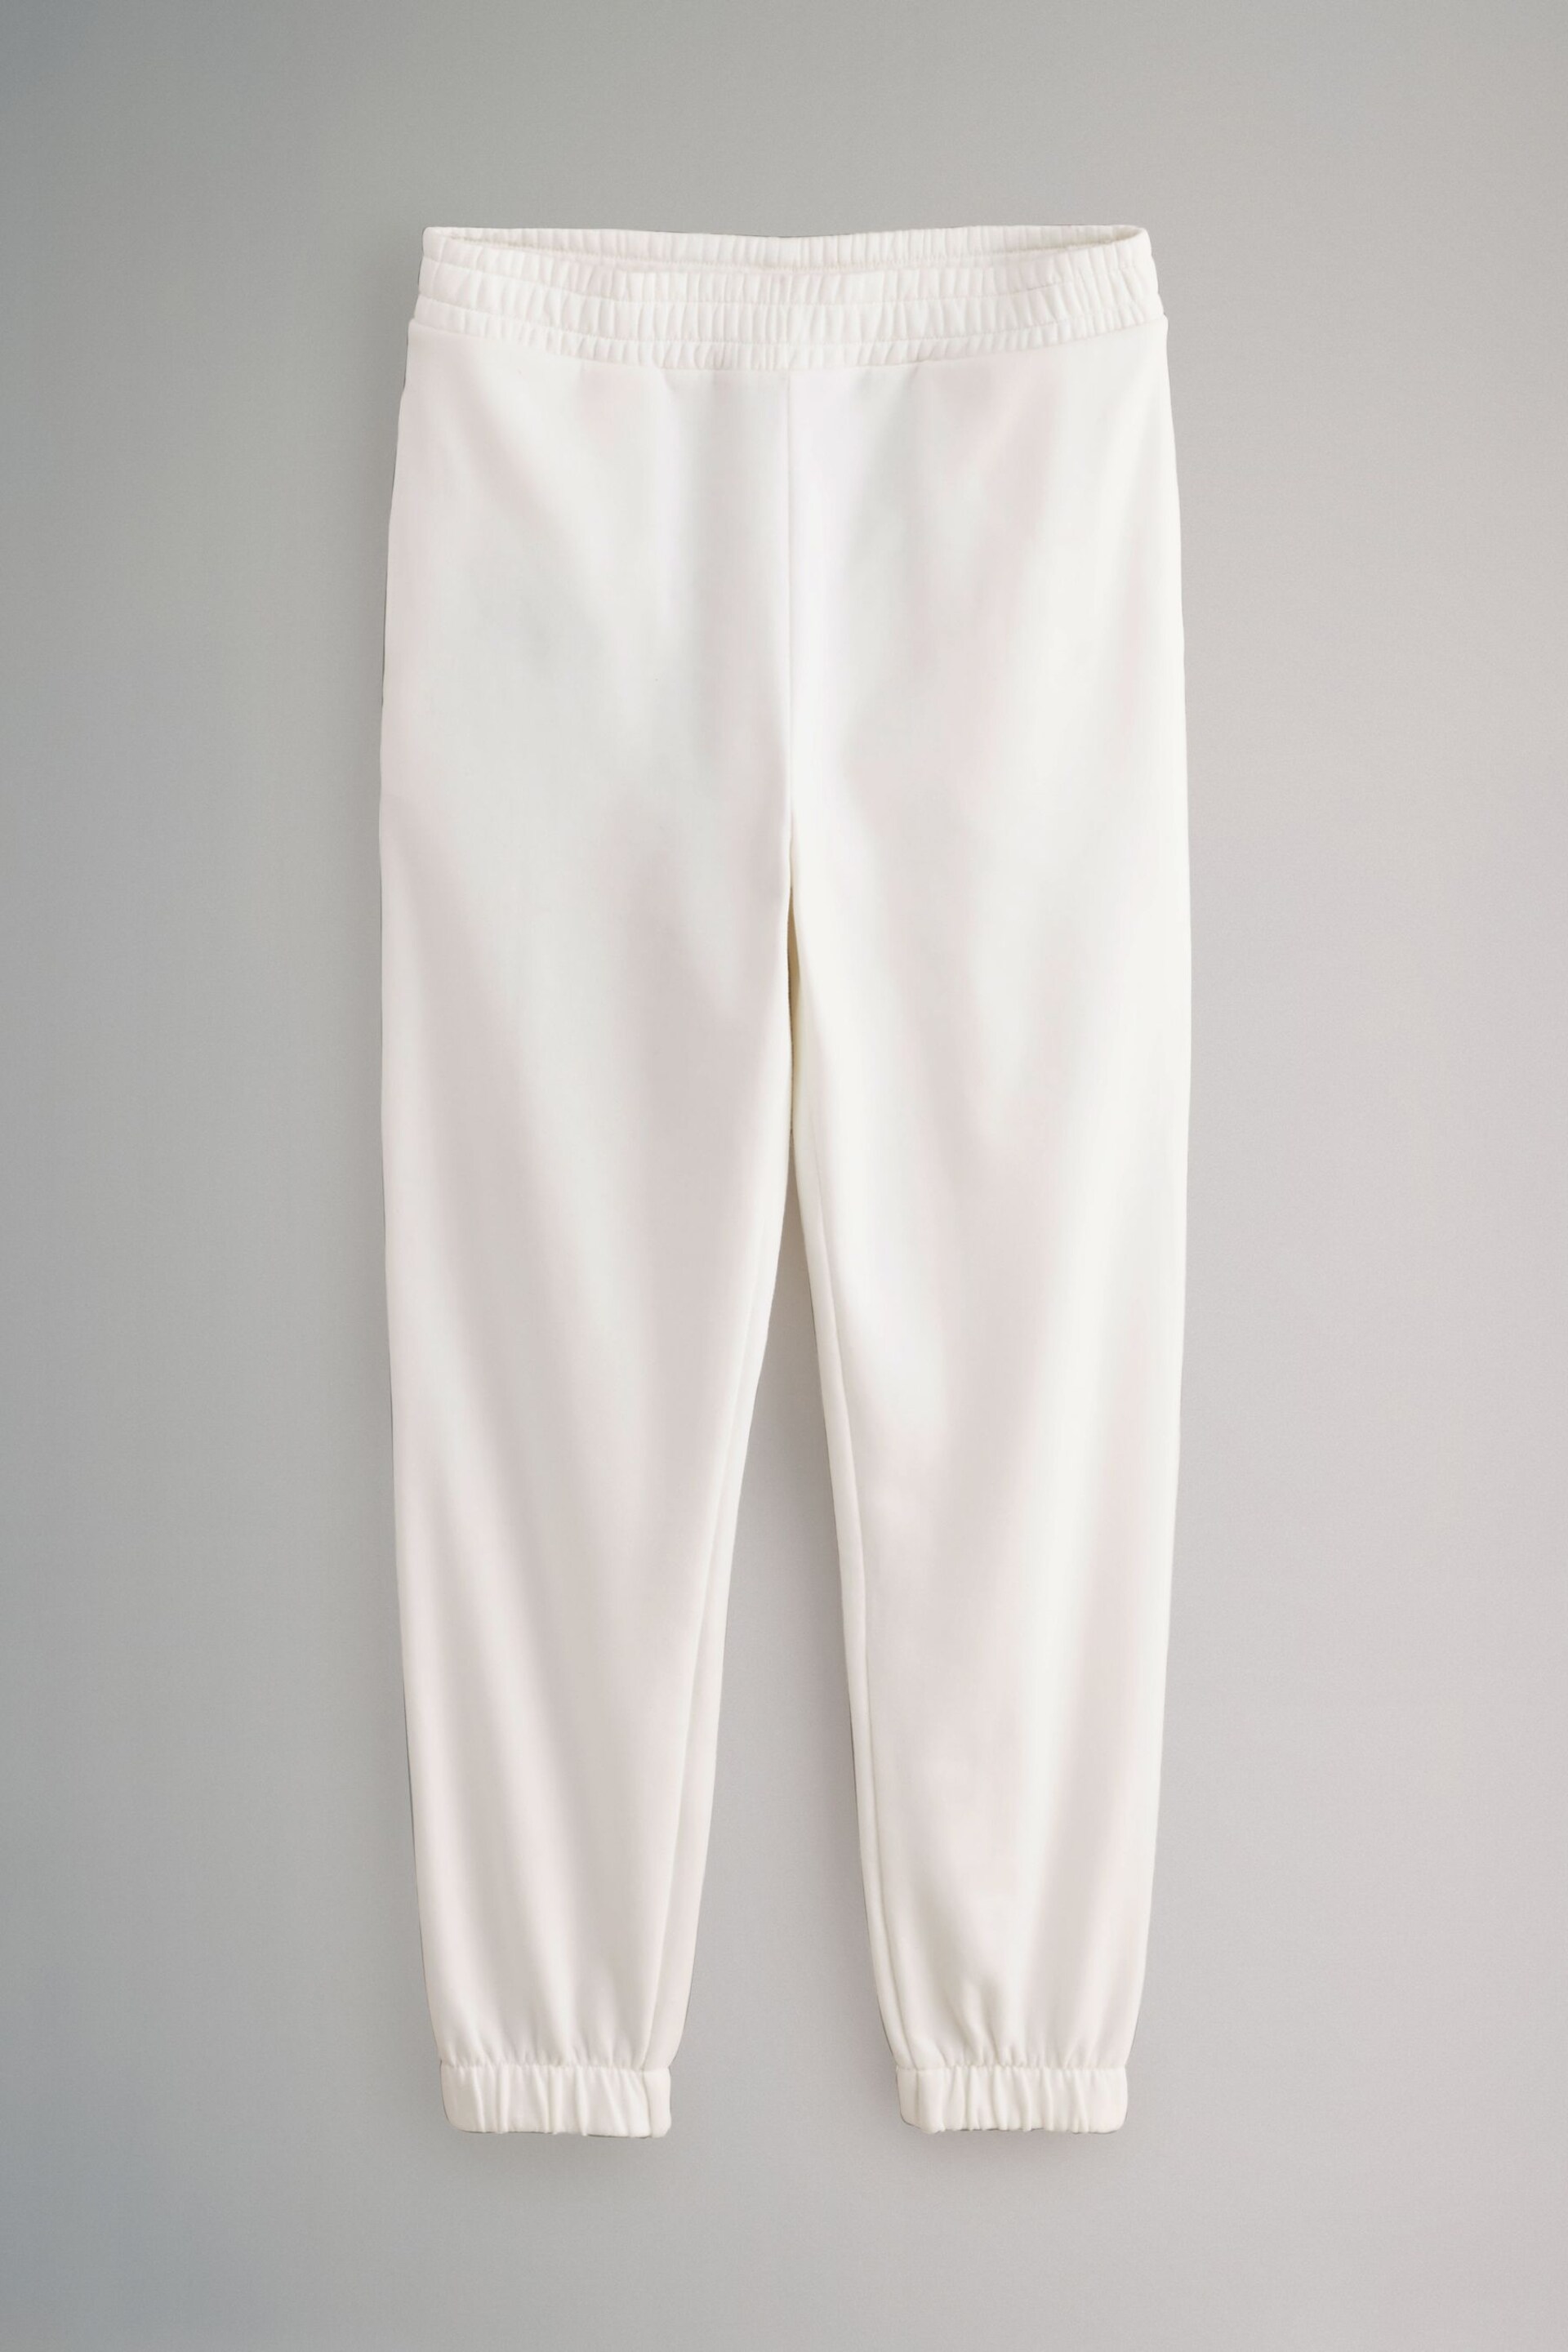 The Set Mink Brown/Cream Cuffed Joggers 2 Pack - Image 10 of 12